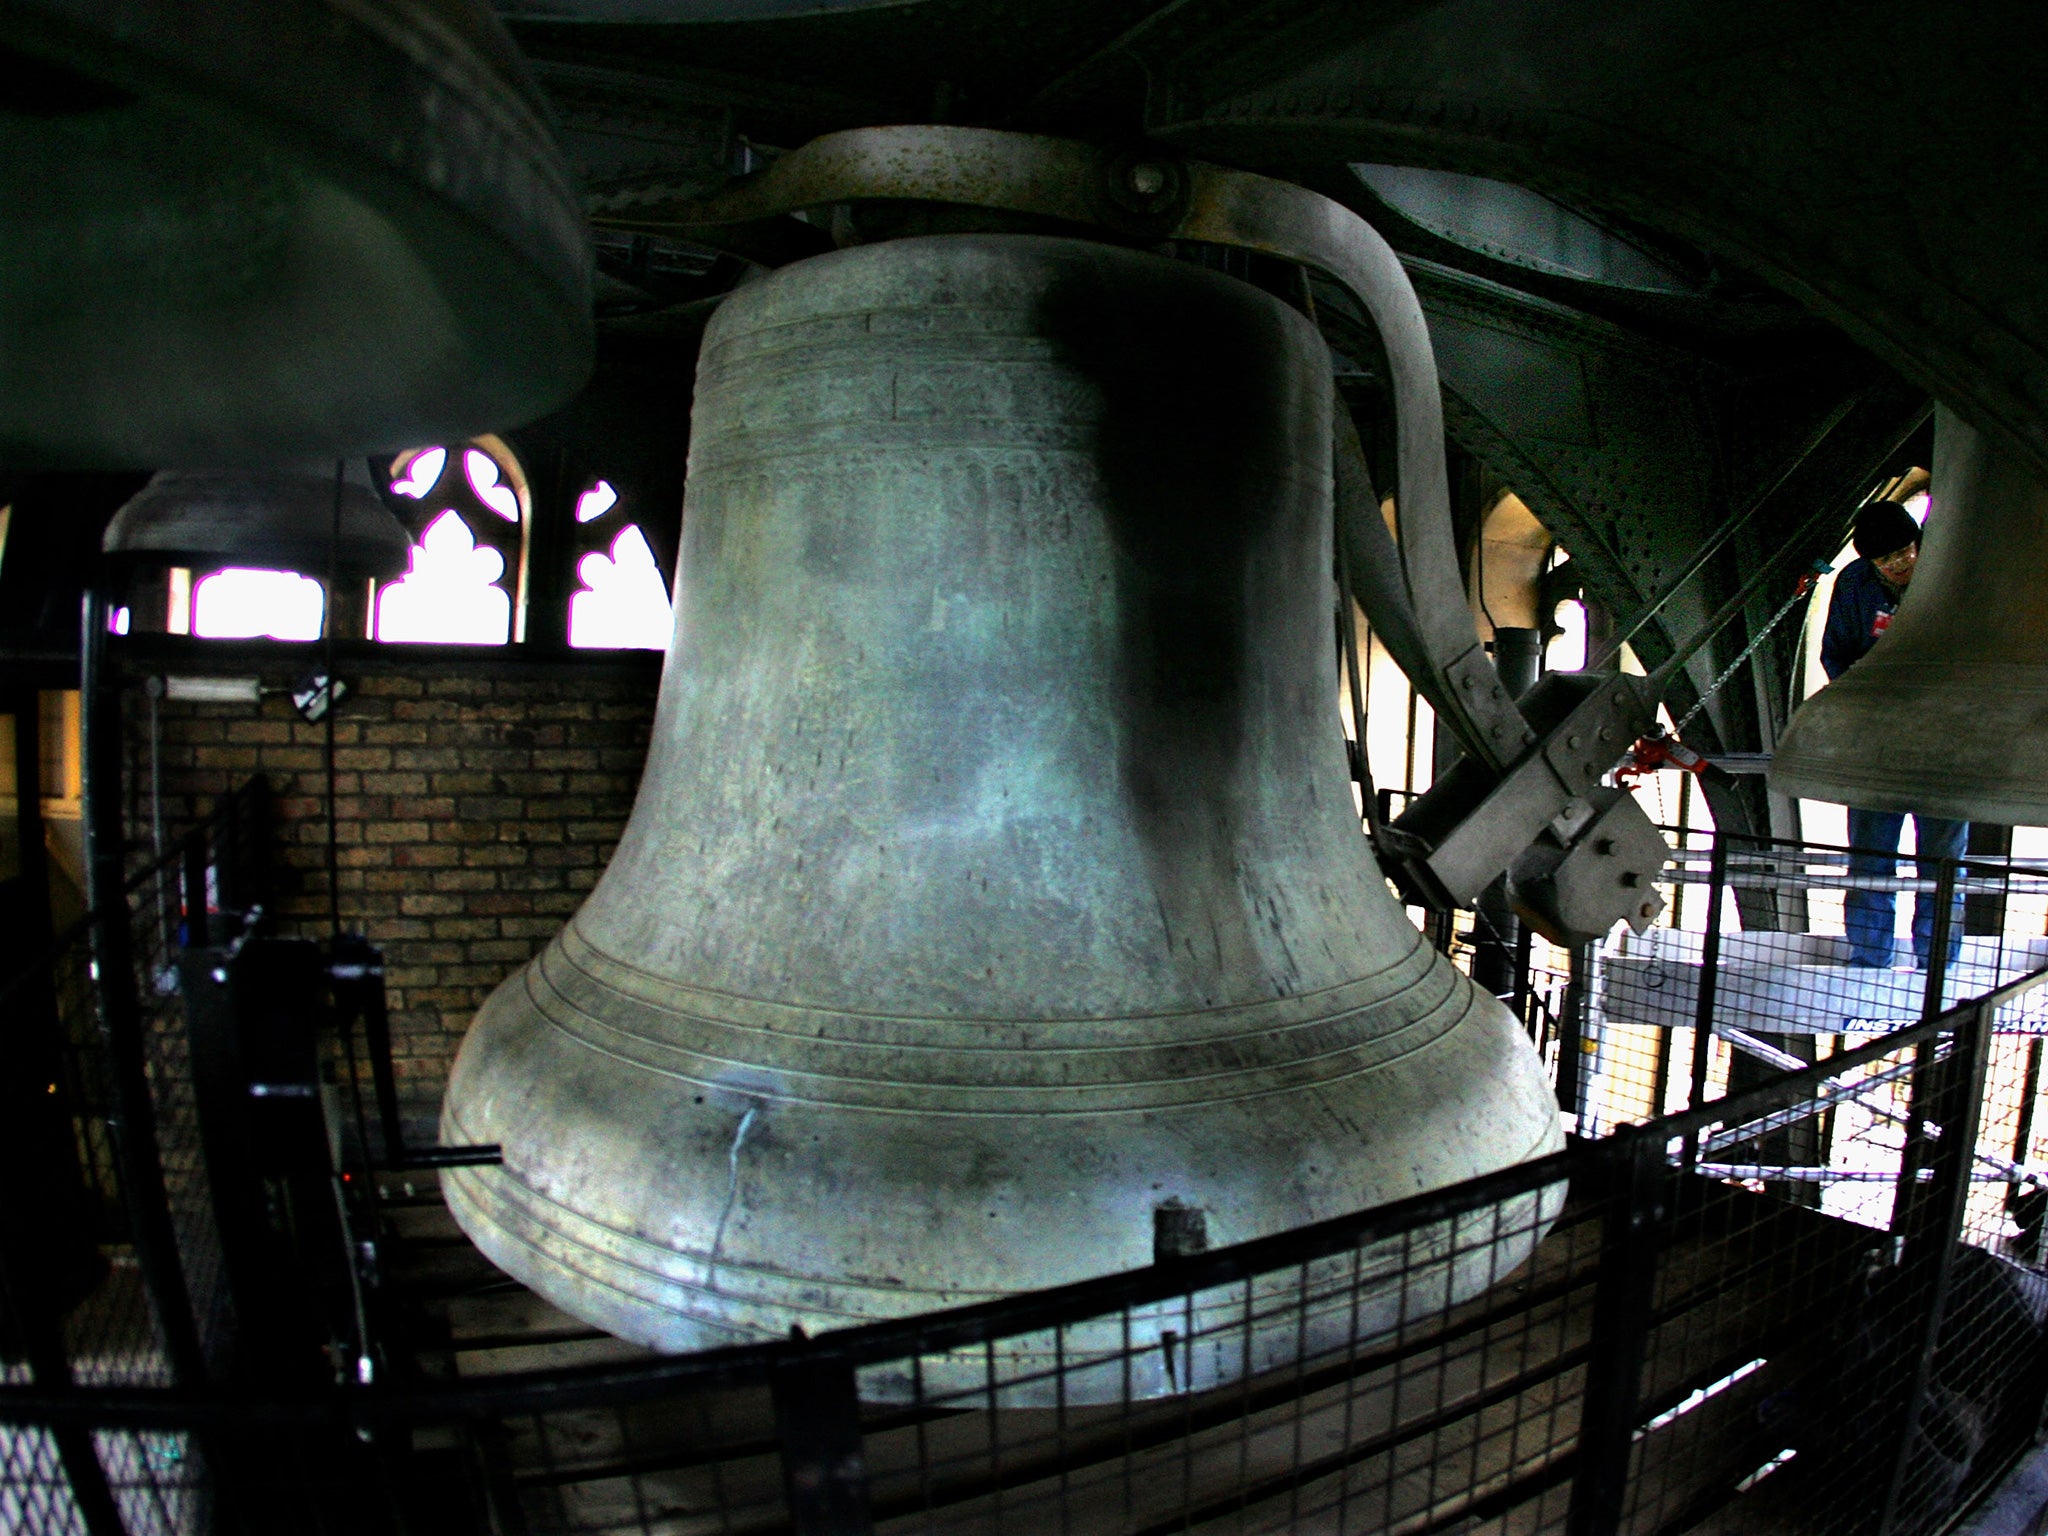 The 13.7-tonne Great Bell first sounded in 1859